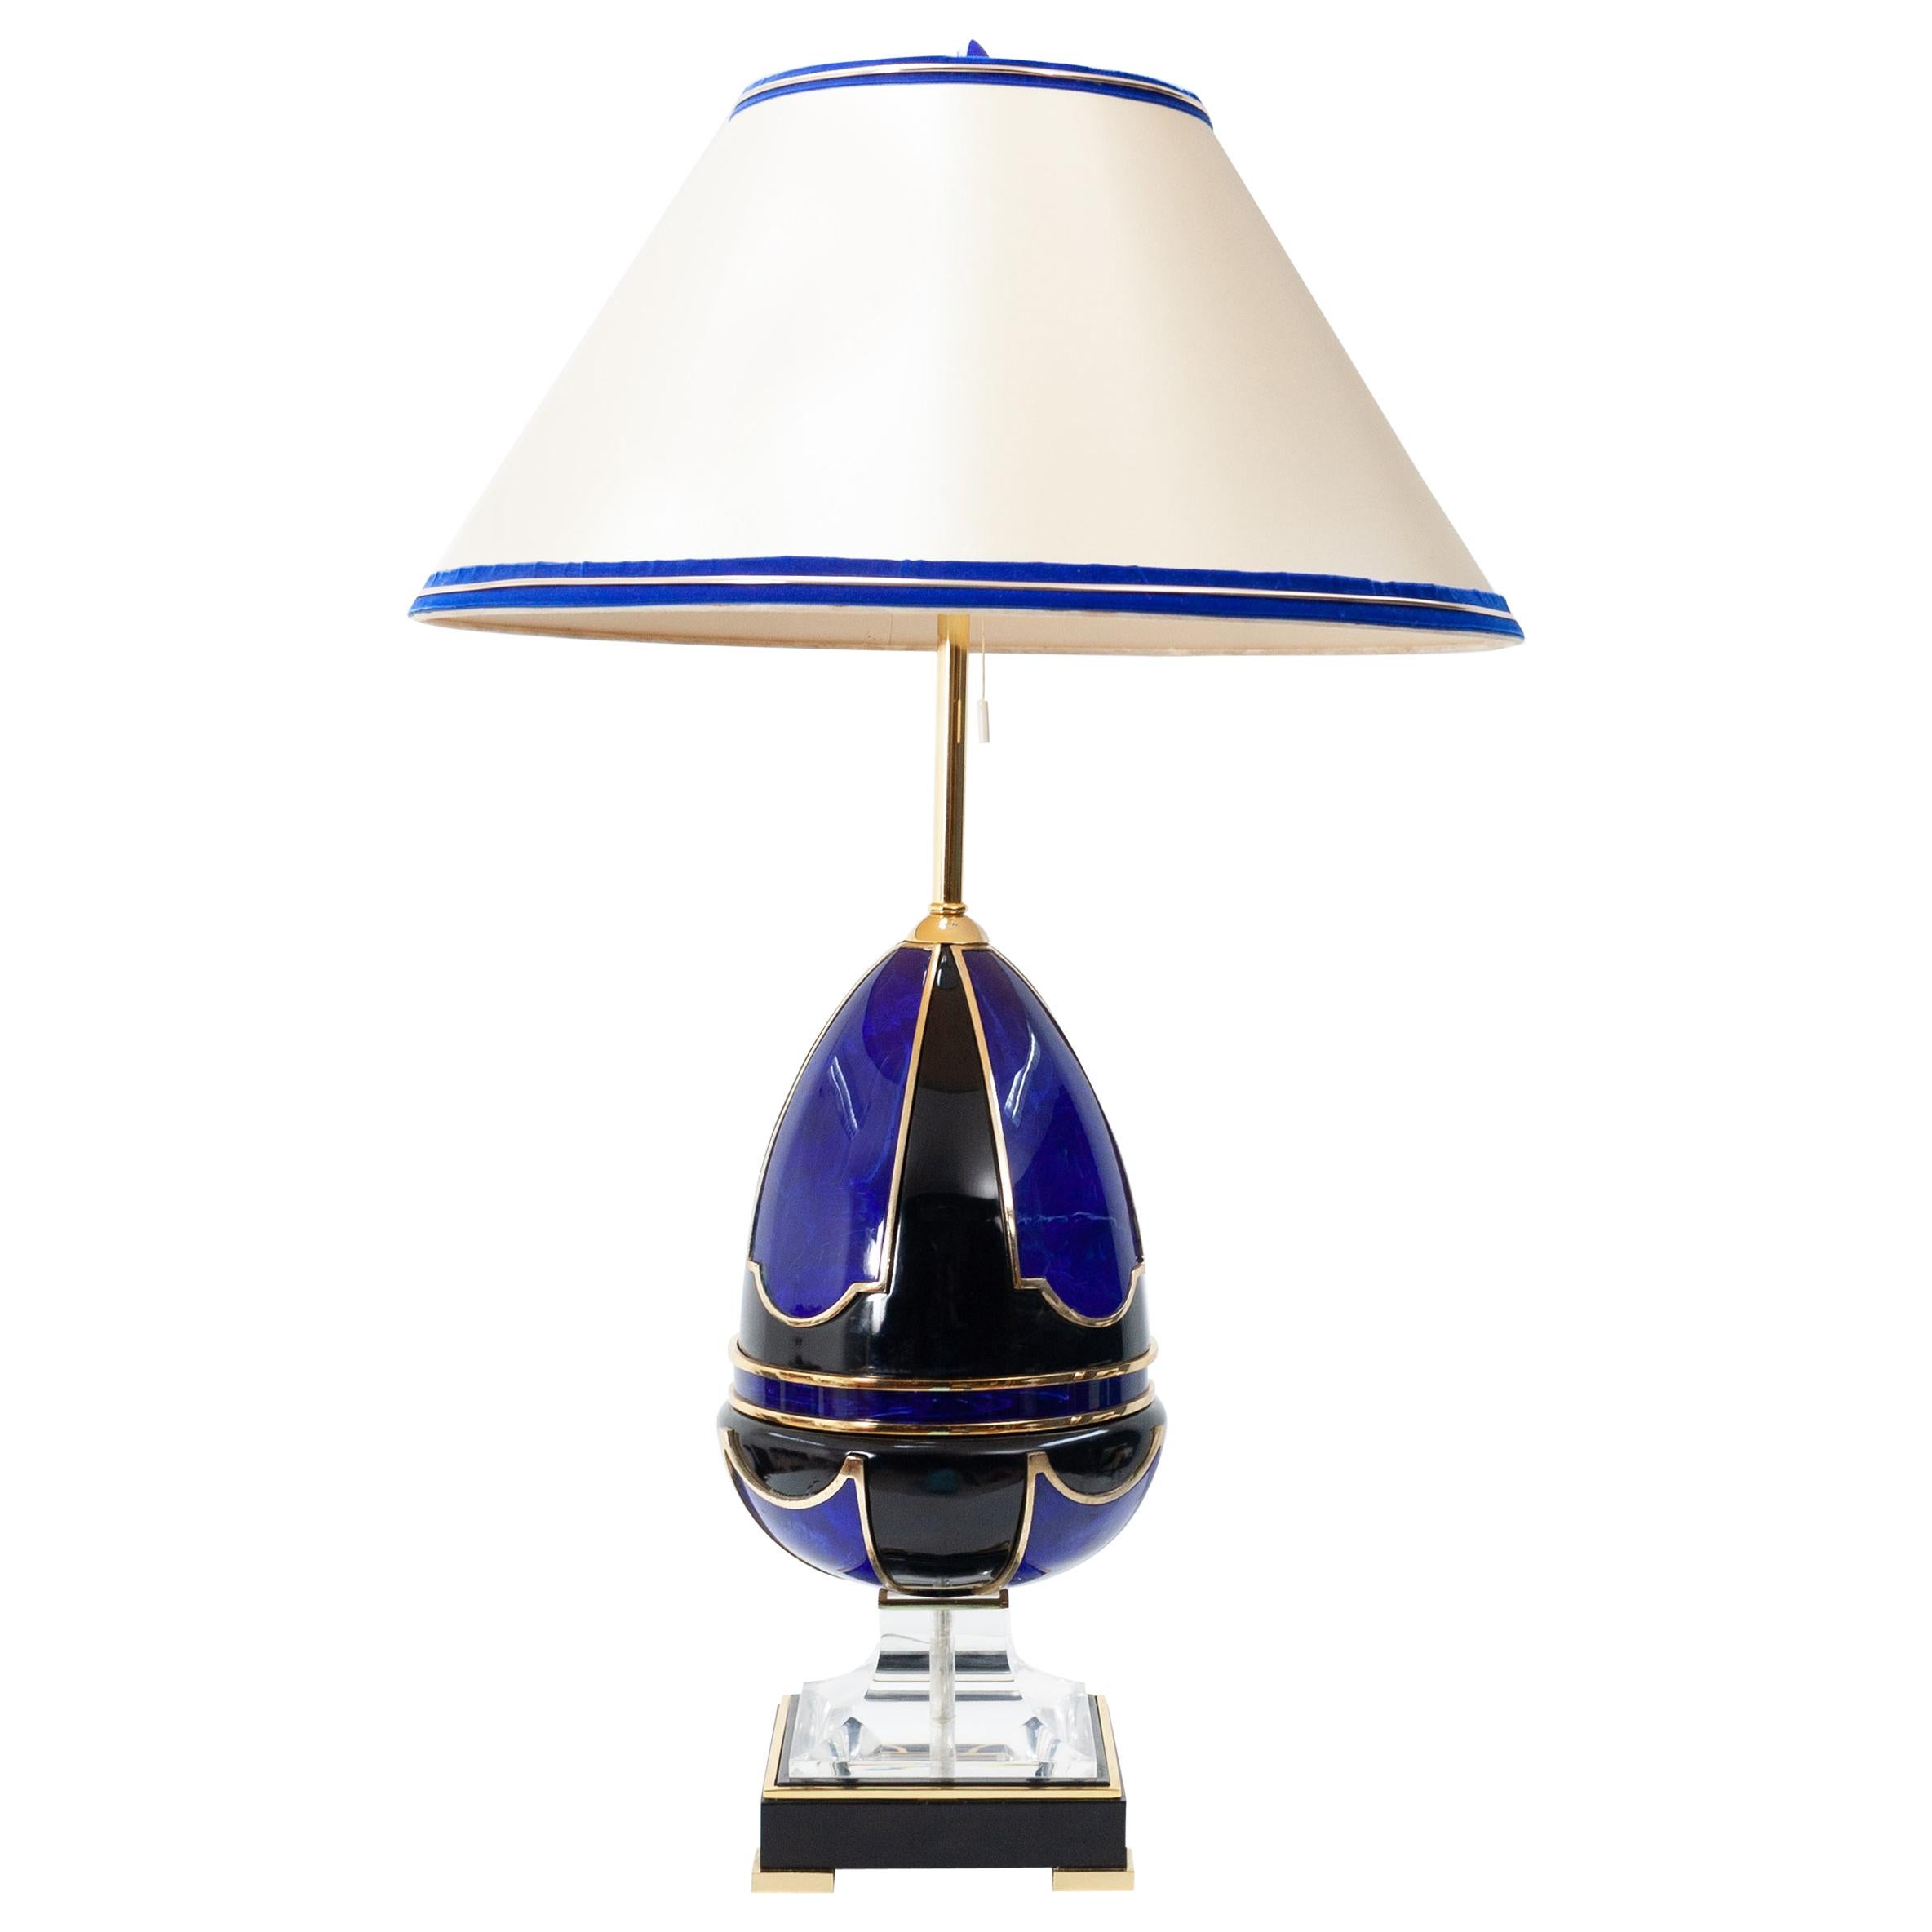 Mariner S A Exclusive Table Lamp For Sale